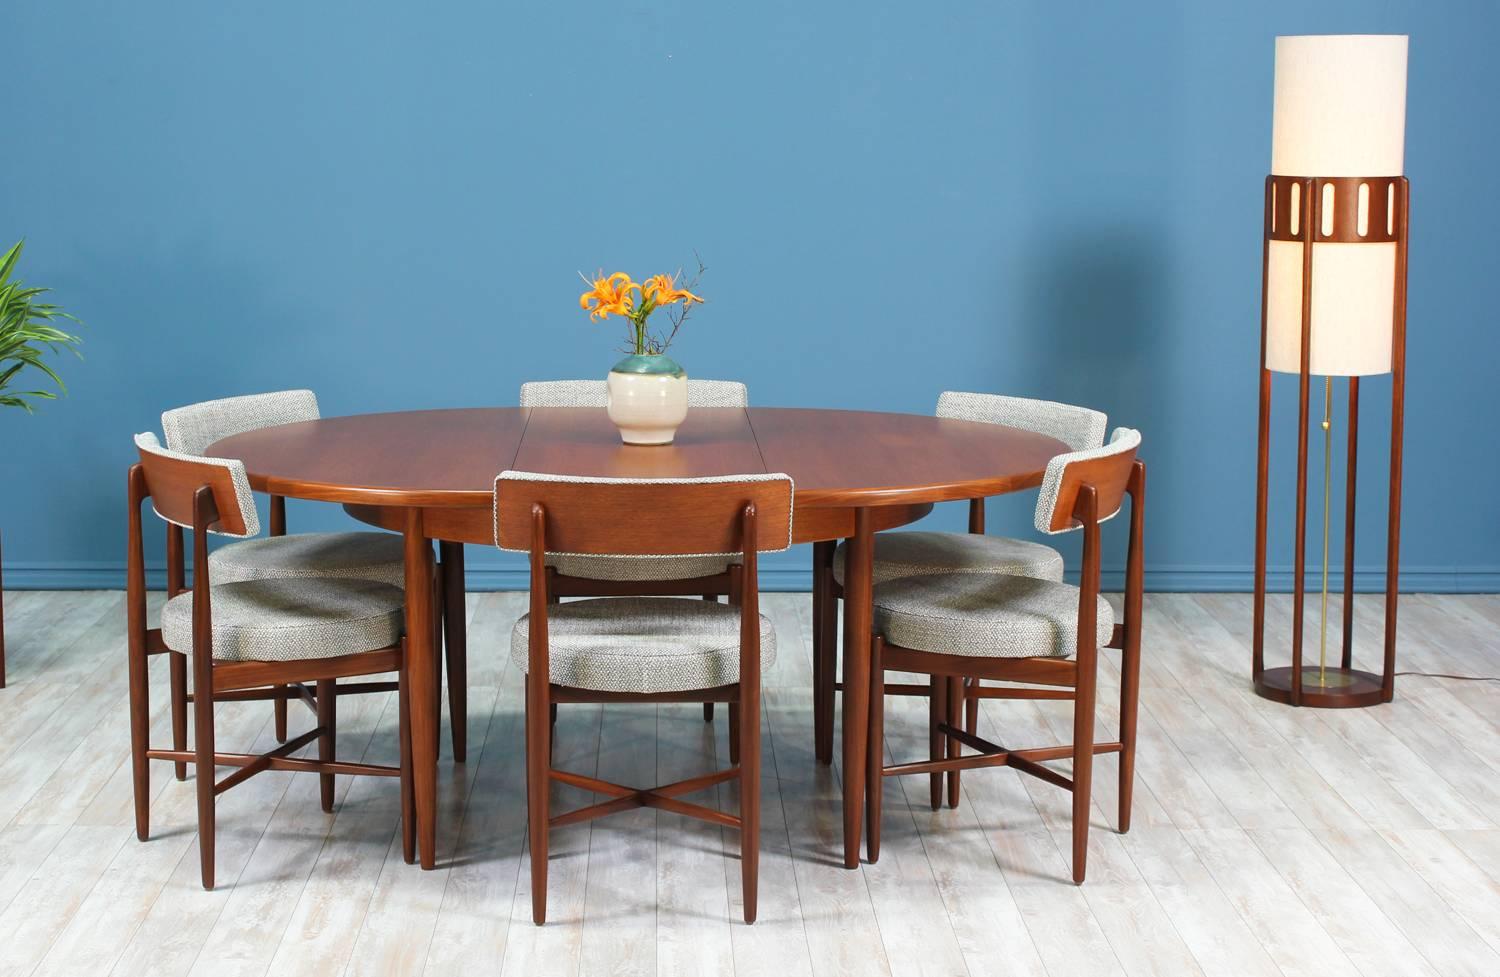 Beautiful dining set consisting of six teak chairs and a butterfly leaf table designed by Danish designer Ib Kofod-Larsen for G-Plan in England circa 1960’s. All six chairs are in excellent restored condition featuring their original solid teak wood